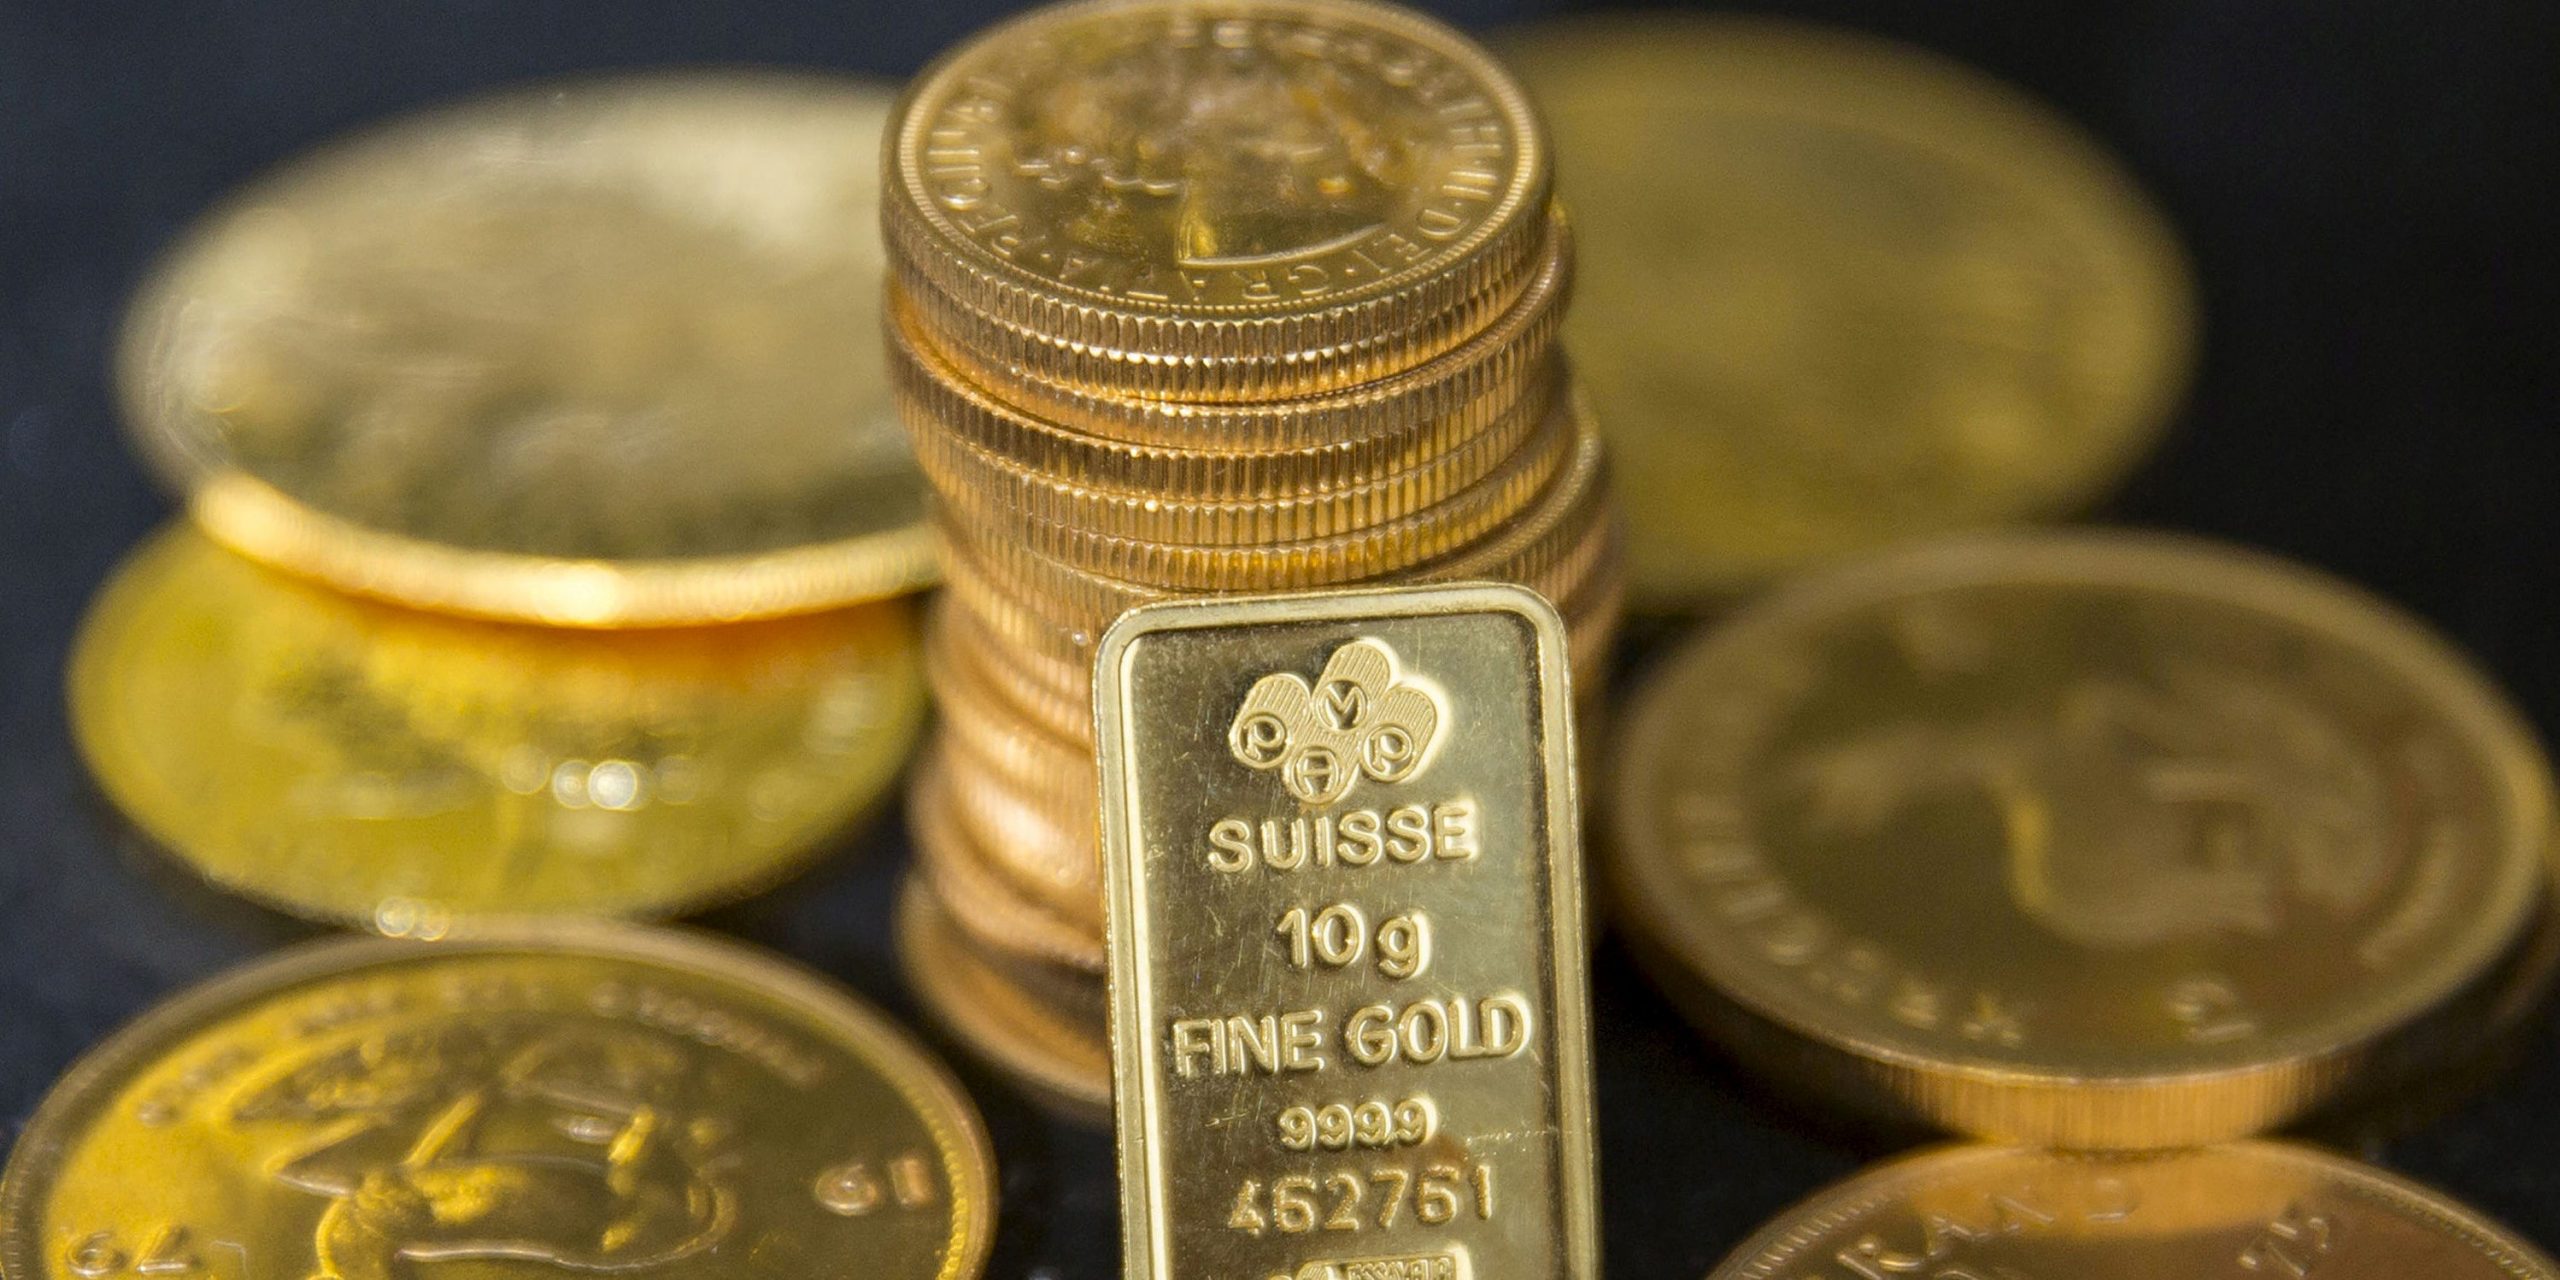 FILE PHOTO: Gold bullion is displayed at Hatton Garden Metals precious metal dealers in London, Britain July 21, 2015. REUTERS/Neil Hall